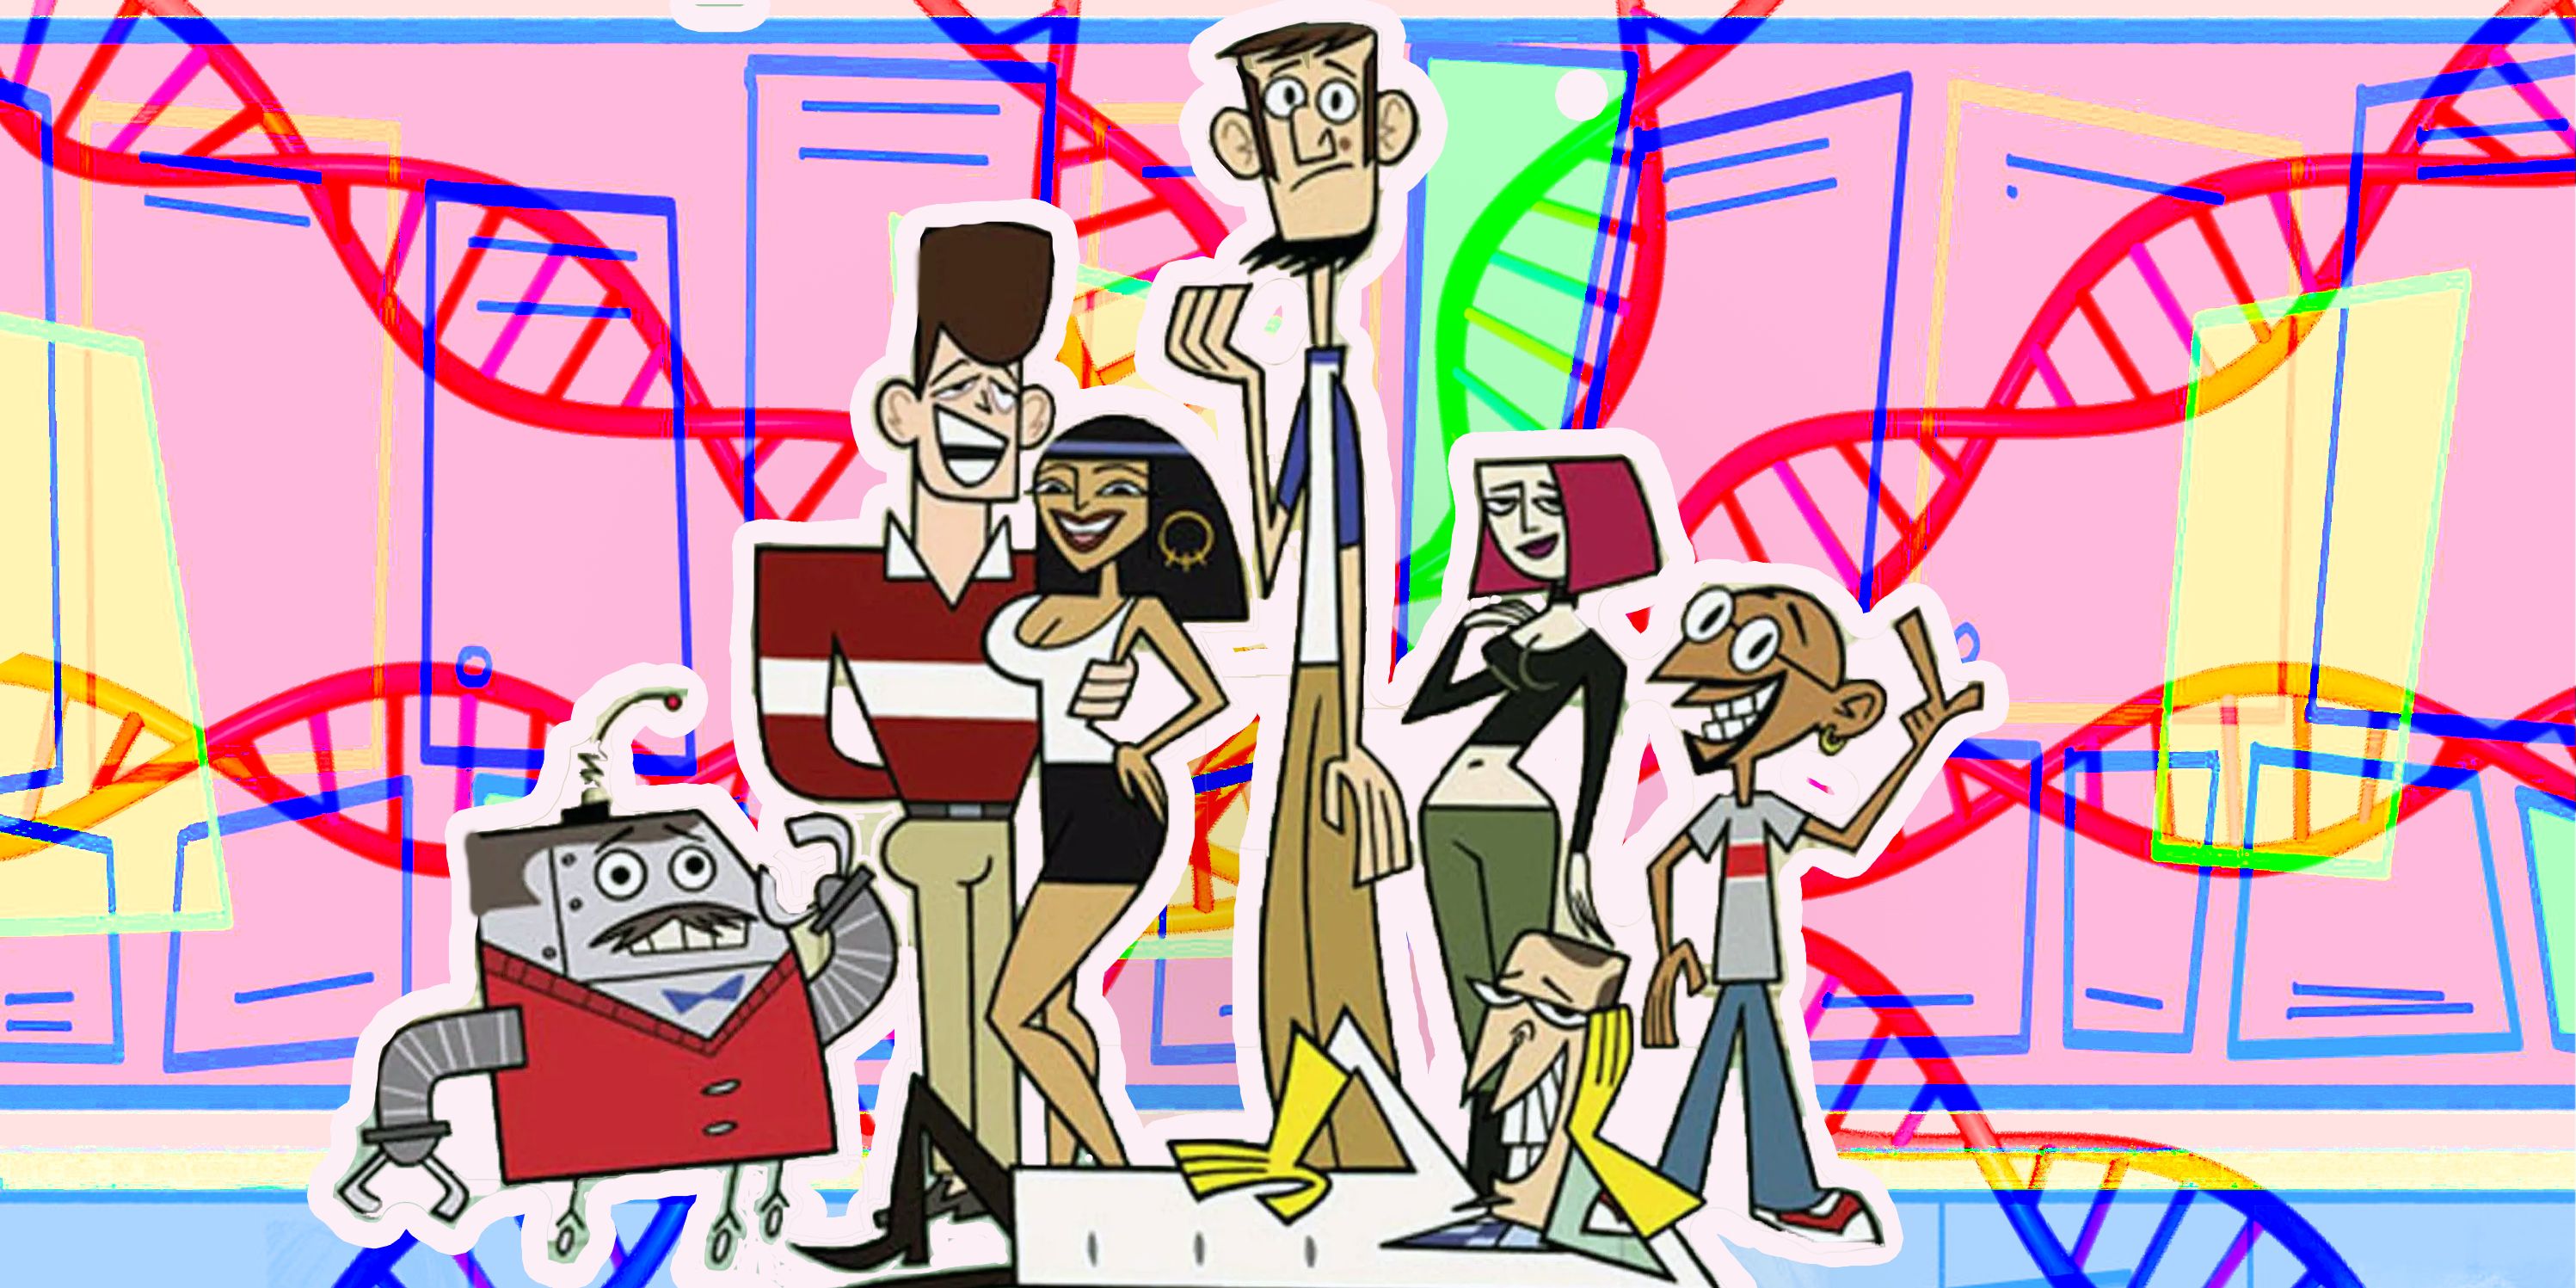 Stylized Image of the Characters from Clone High, they are together in a group and there are dna strangs surrounding them